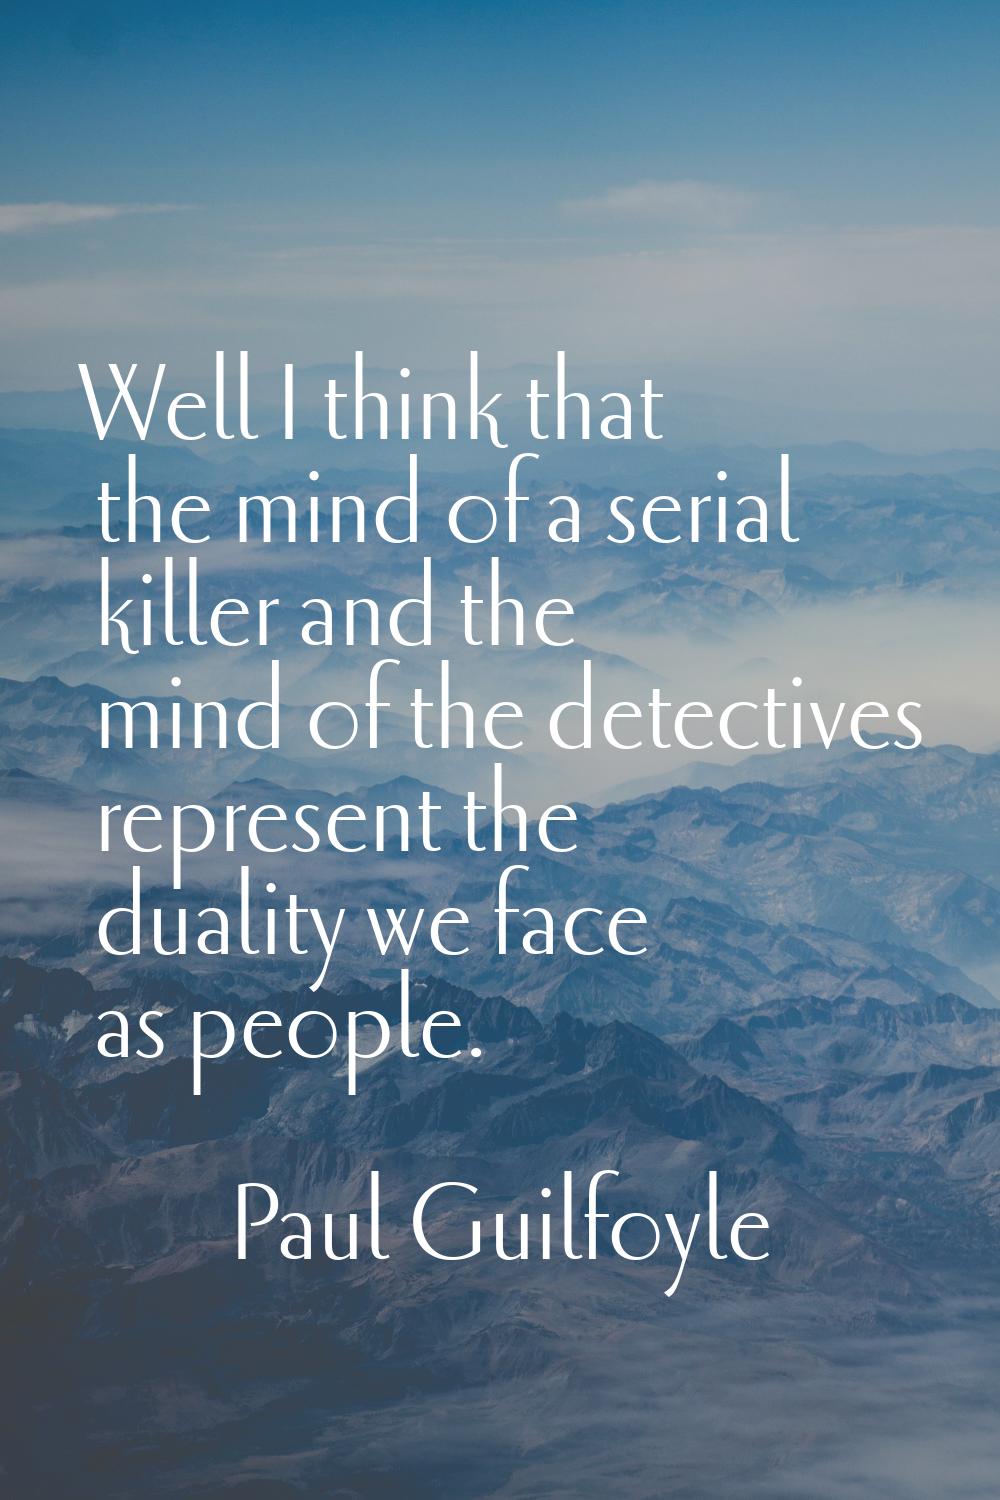 Well I think that the mind of a serial killer and the mind of the detectives represent the duality 